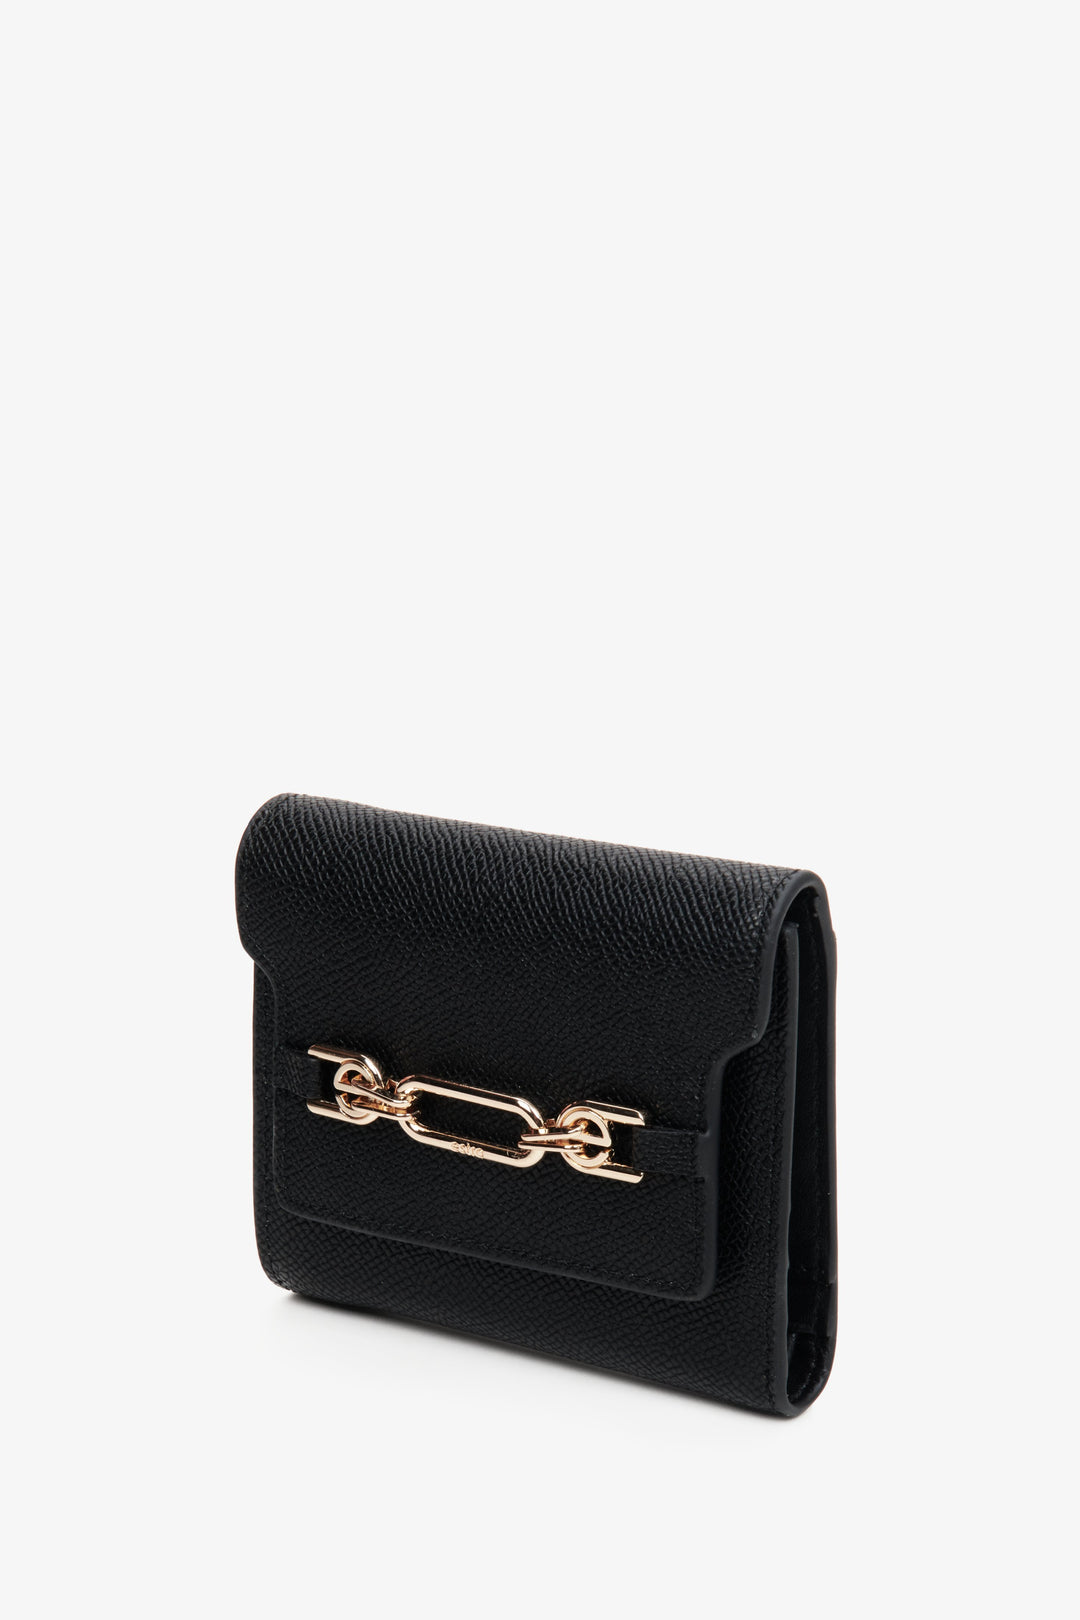 Women's black leather wallet with a gold clasp, Estro.